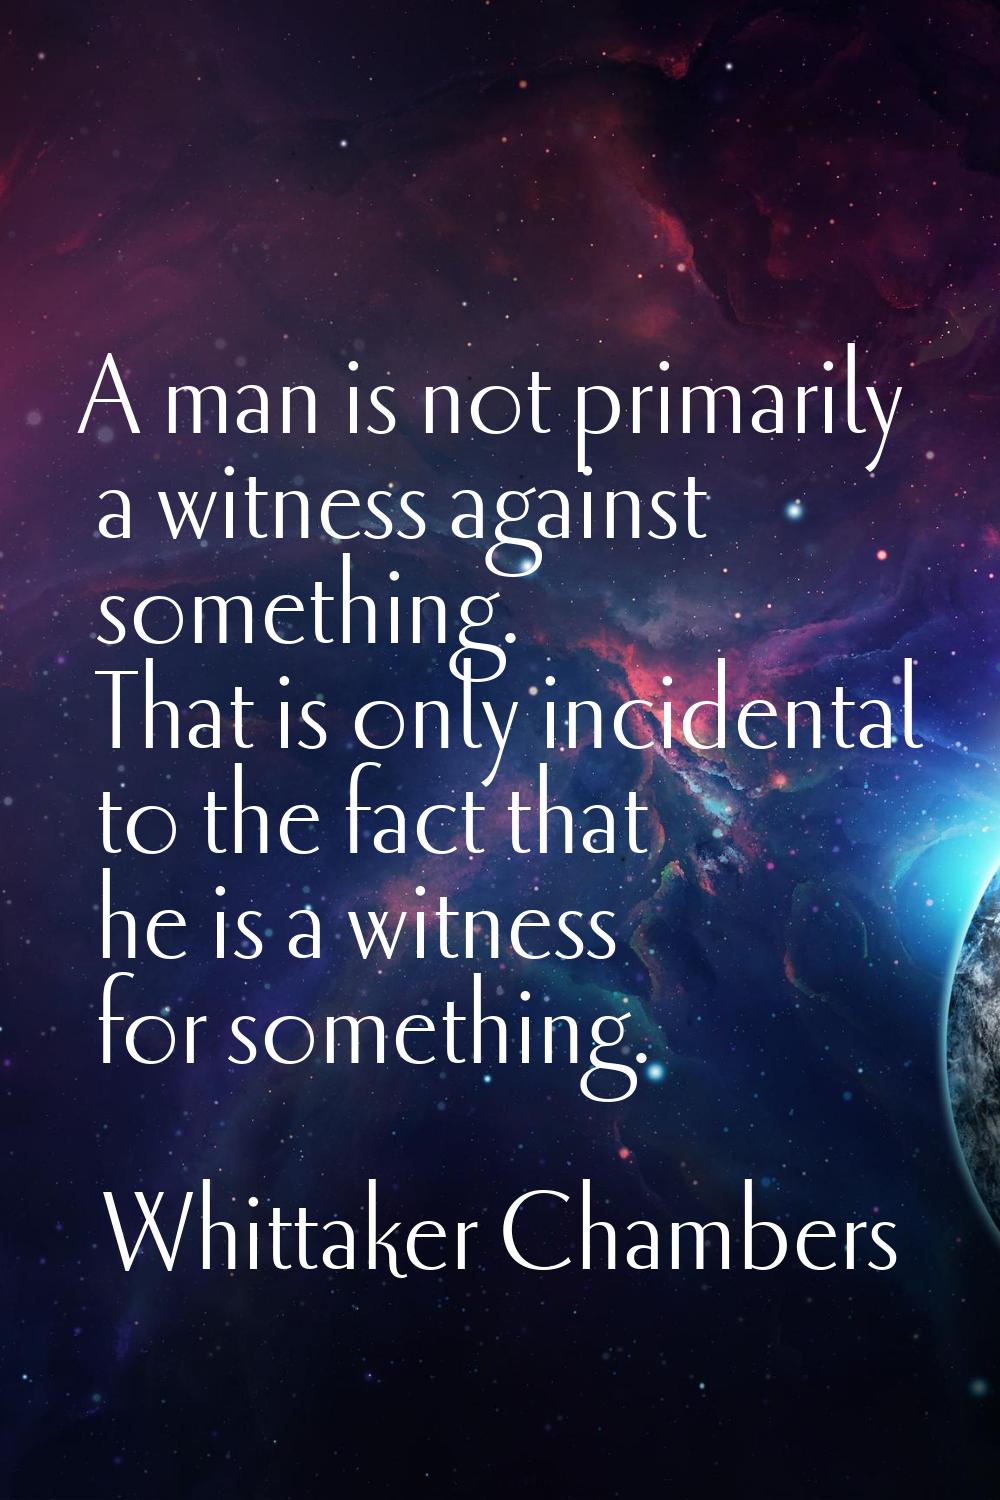 A man is not primarily a witness against something. That is only incidental to the fact that he is 